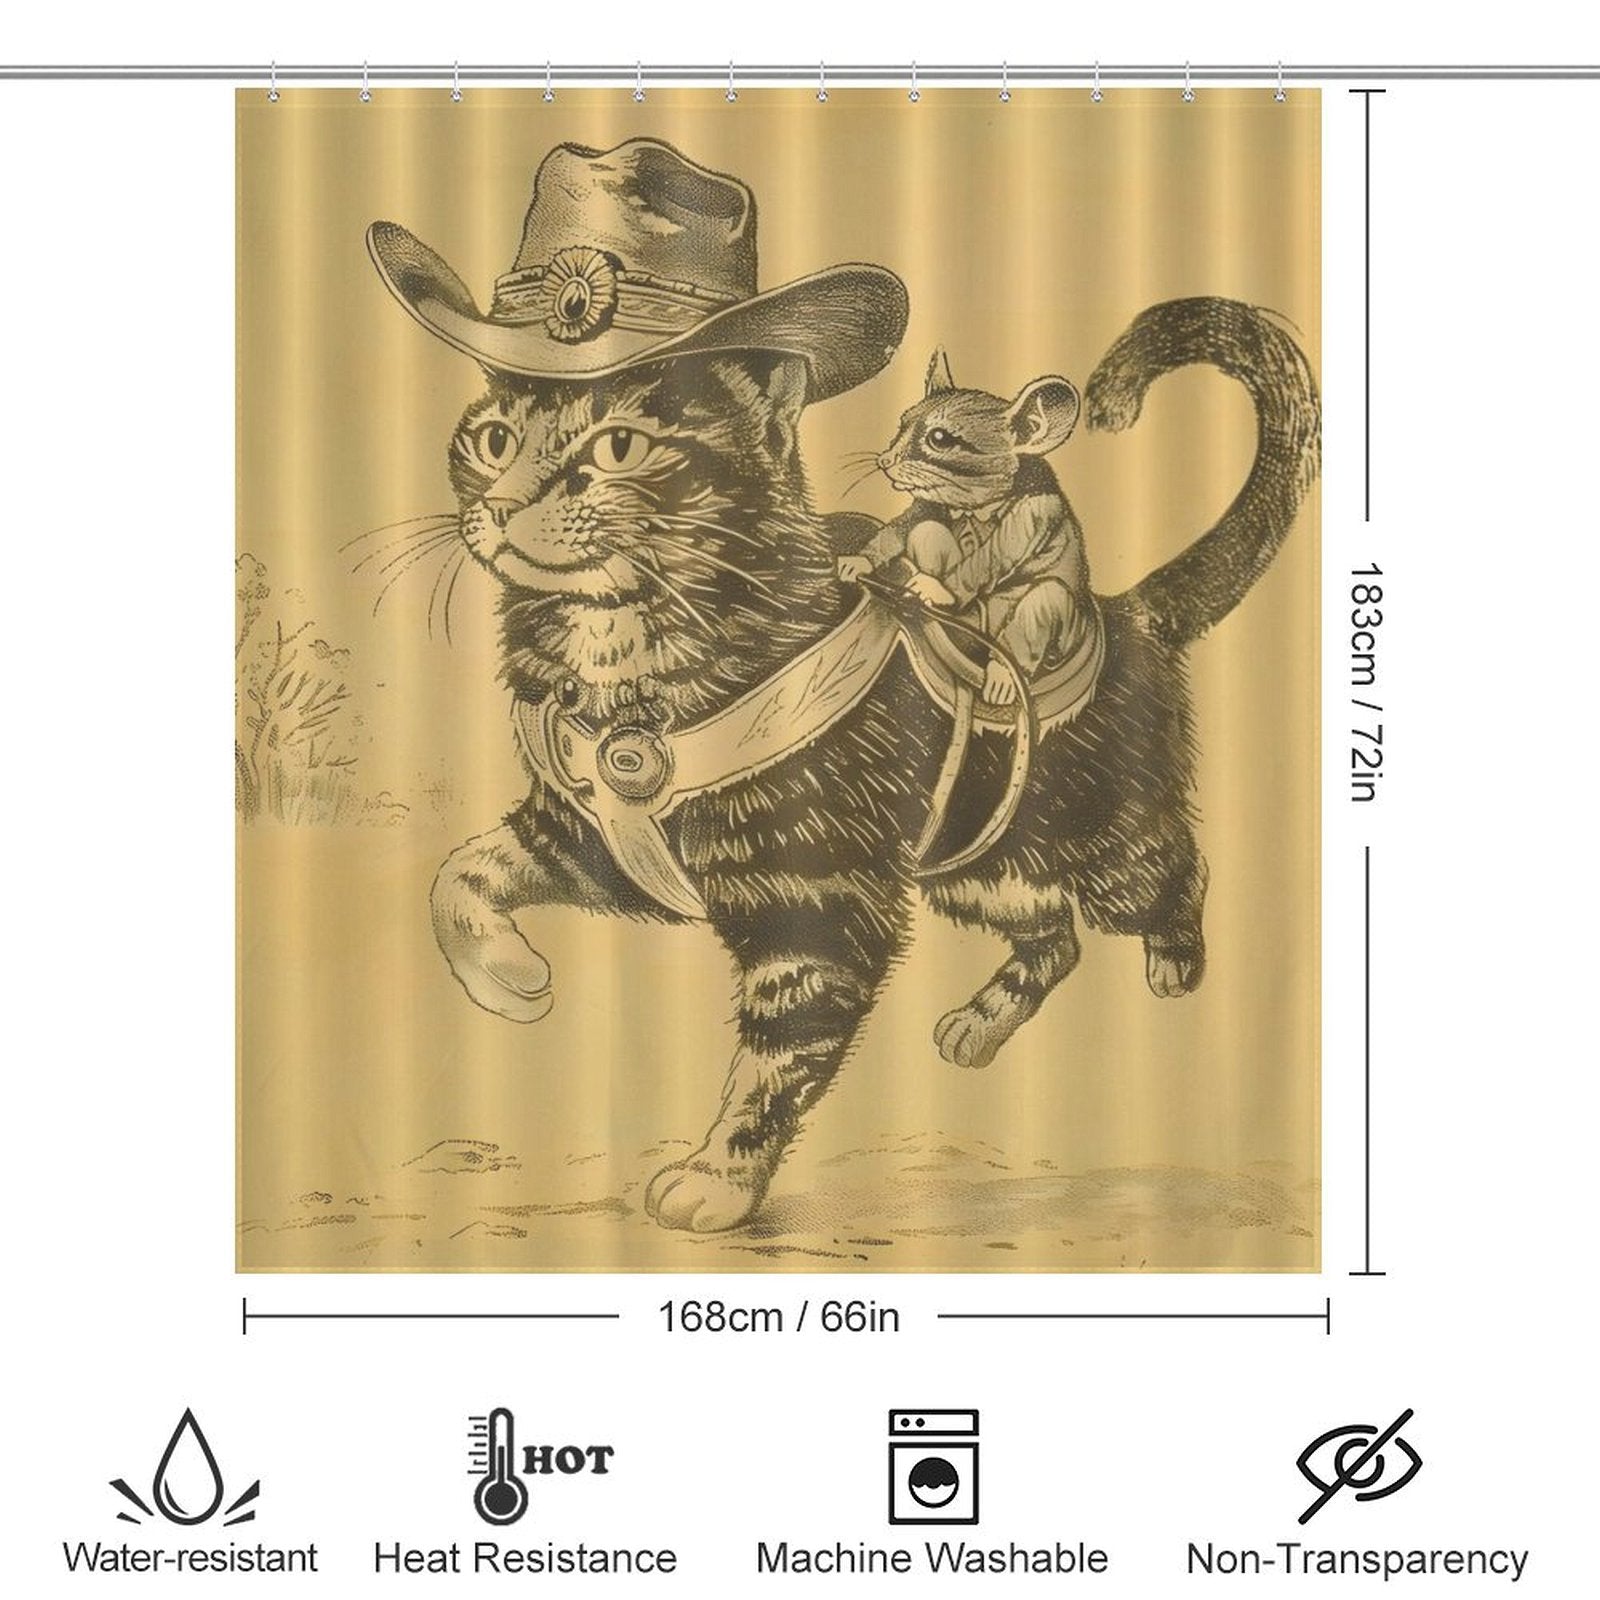 An illustrated Cotton Cat Funny Cool Mouse Riding Cat Shower Curtain, perfect for bathroom decor, features a funny cool mouse riding a cat in a cowboy outfit. It measures 183cm x 168cm and offers water resistance, heat resistance, is machine washable and non-transparent.